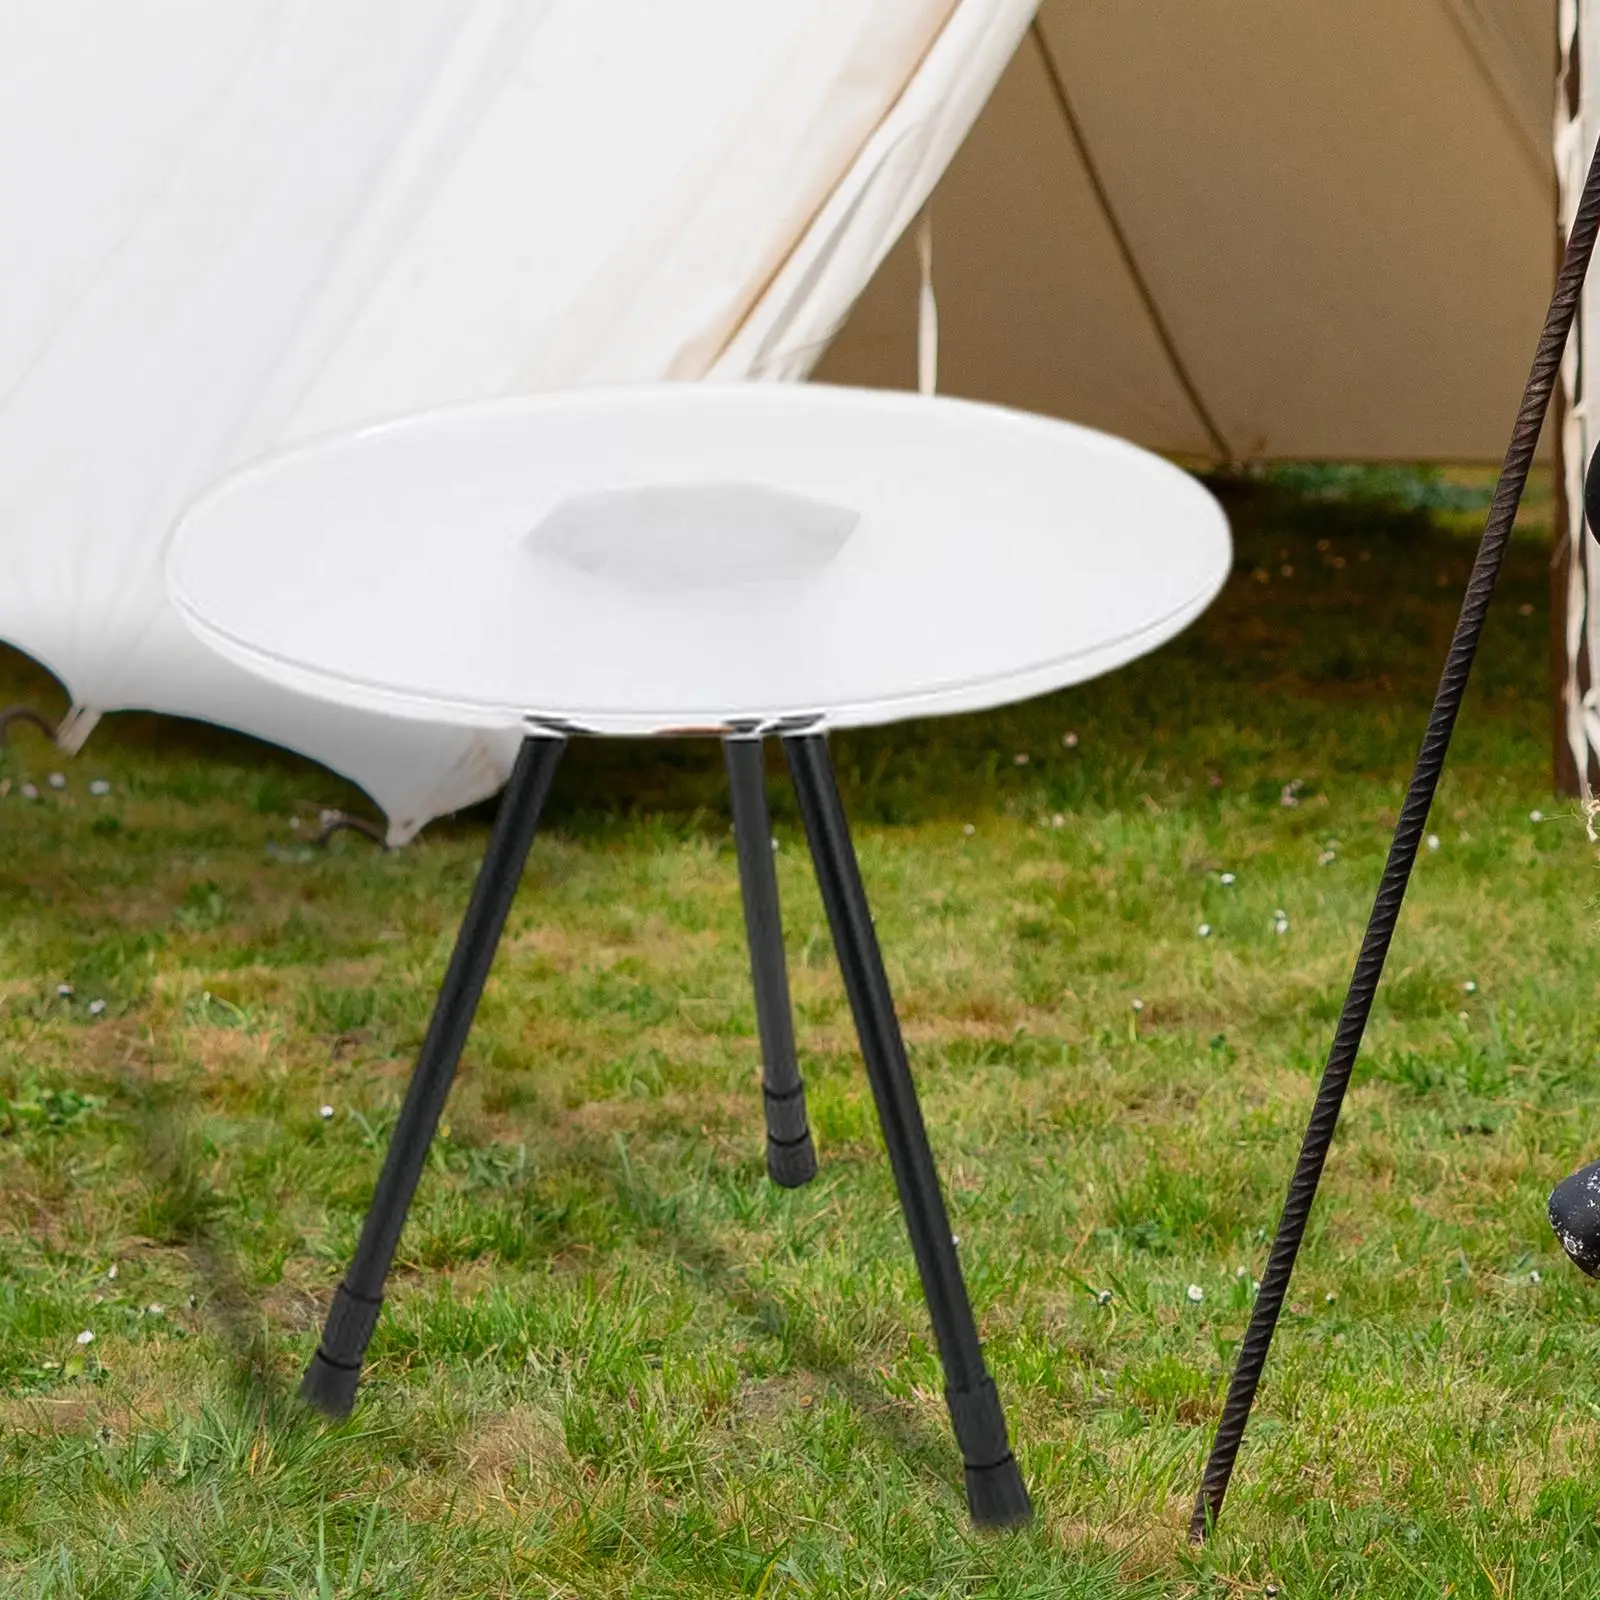 Three Legged Triangular Round Table Collapsible Multifunctional Stable Retractable Lift Dining Desk for Picnic Kitchen Barbecue